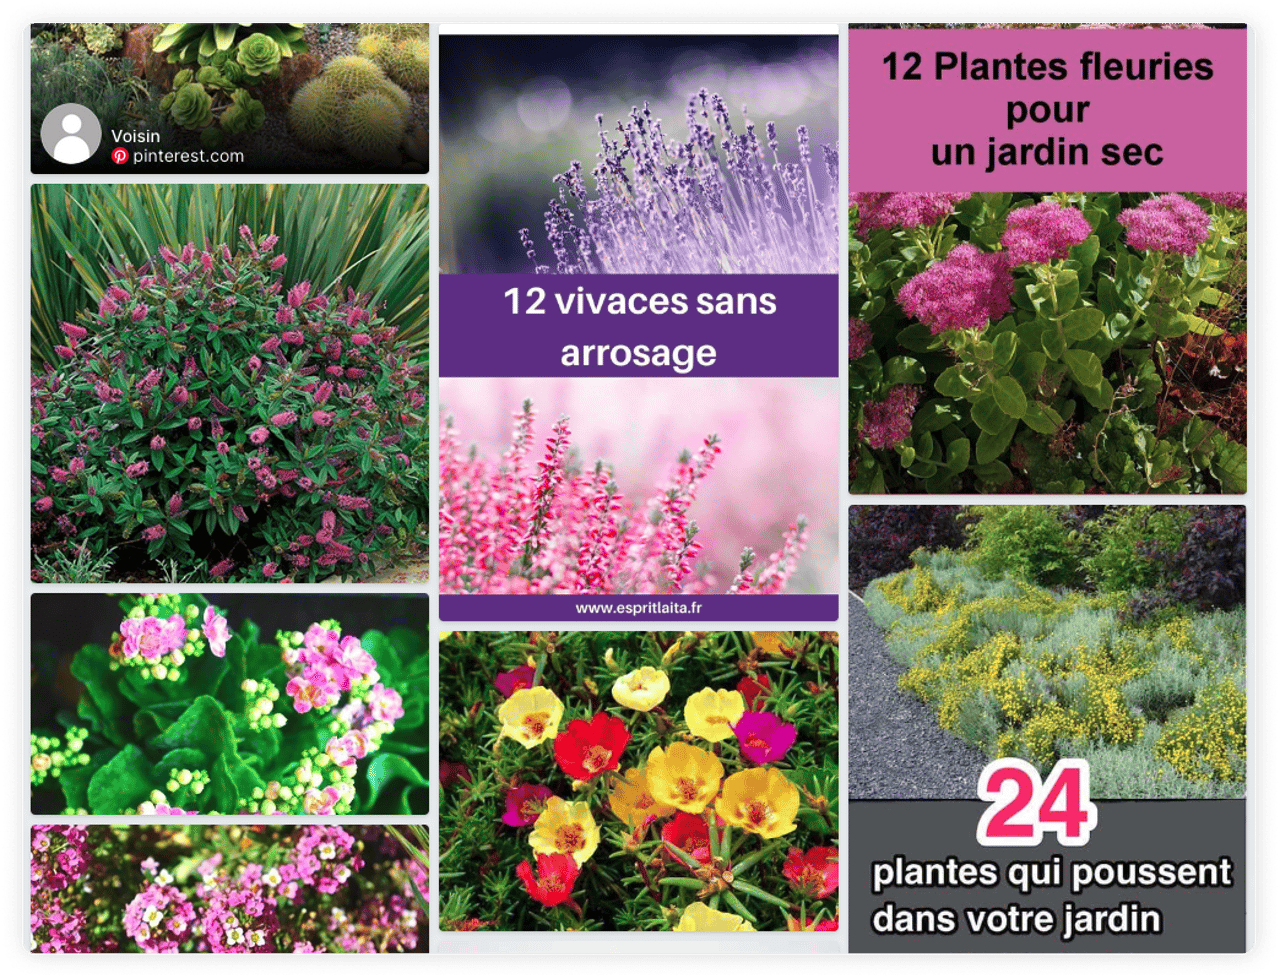 Plants that don’t need water